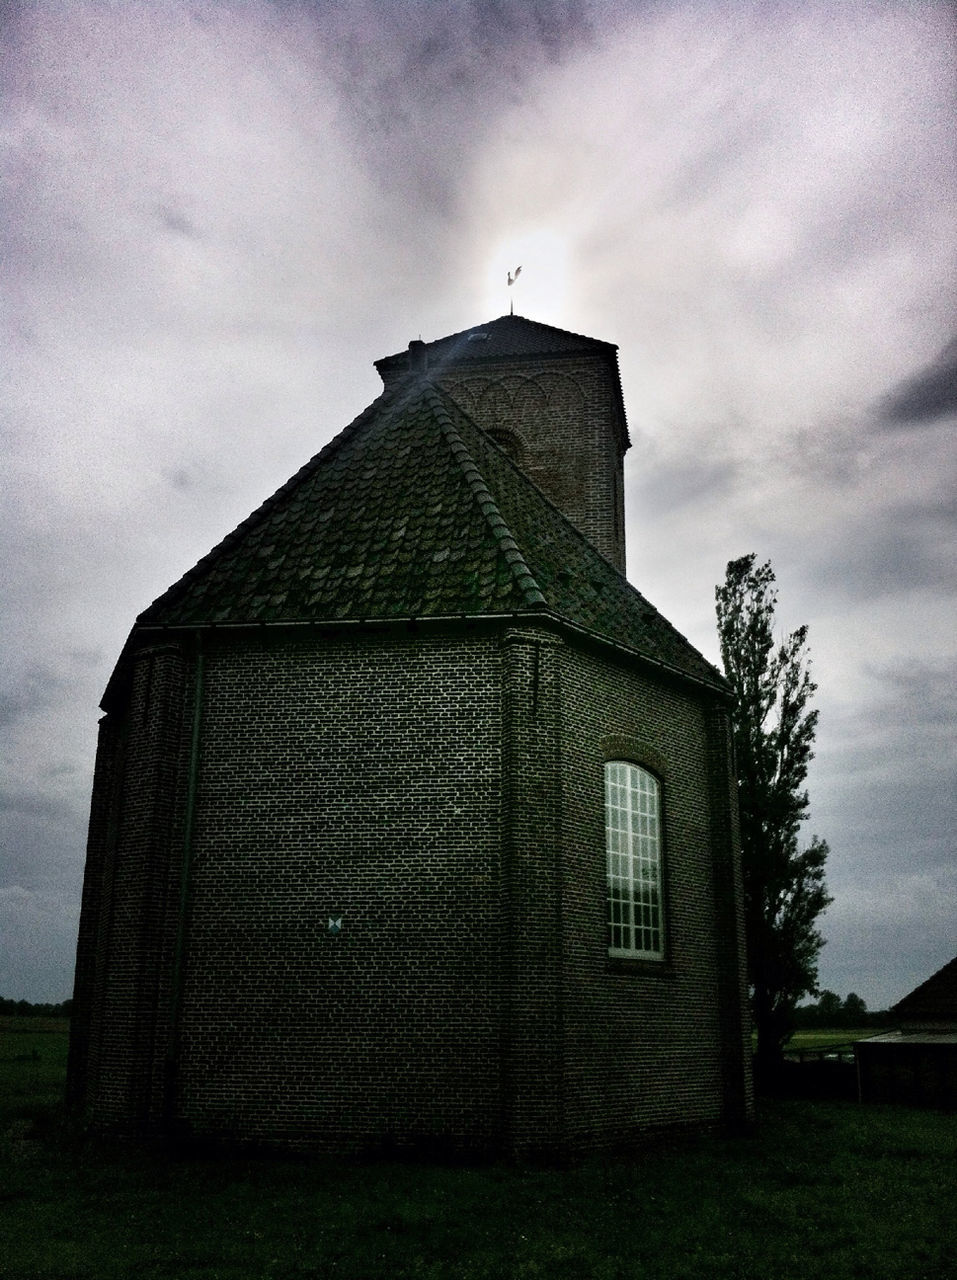 architecture, building exterior, built structure, sky, cloud - sky, low angle view, place of worship, church, cloudy, religion, spirituality, cloud, history, outdoors, day, no people, window, exterior